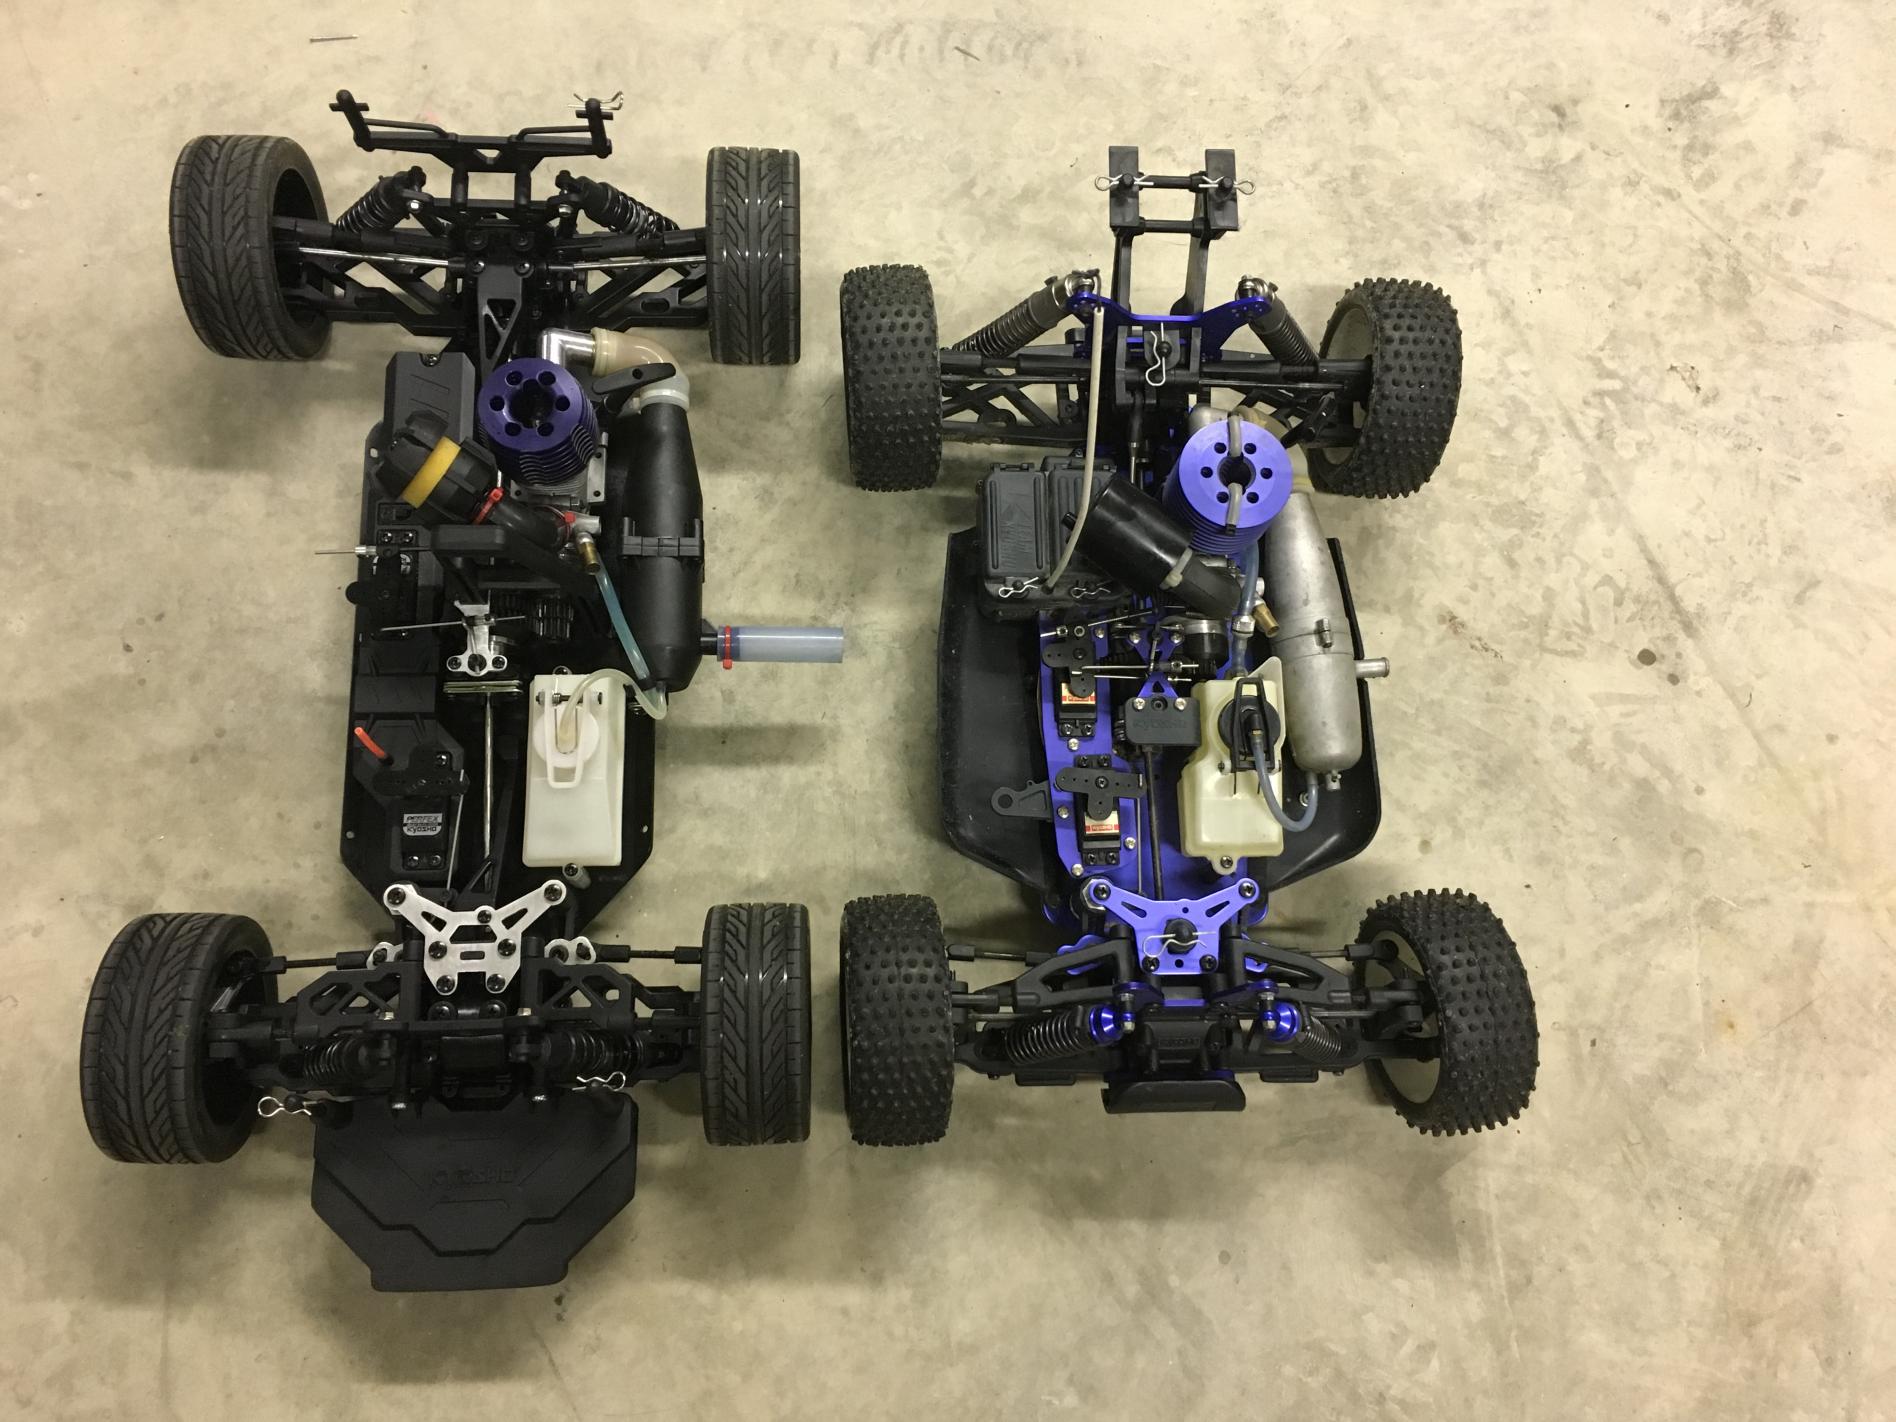 Kyosho or not? - R/C Tech Forums